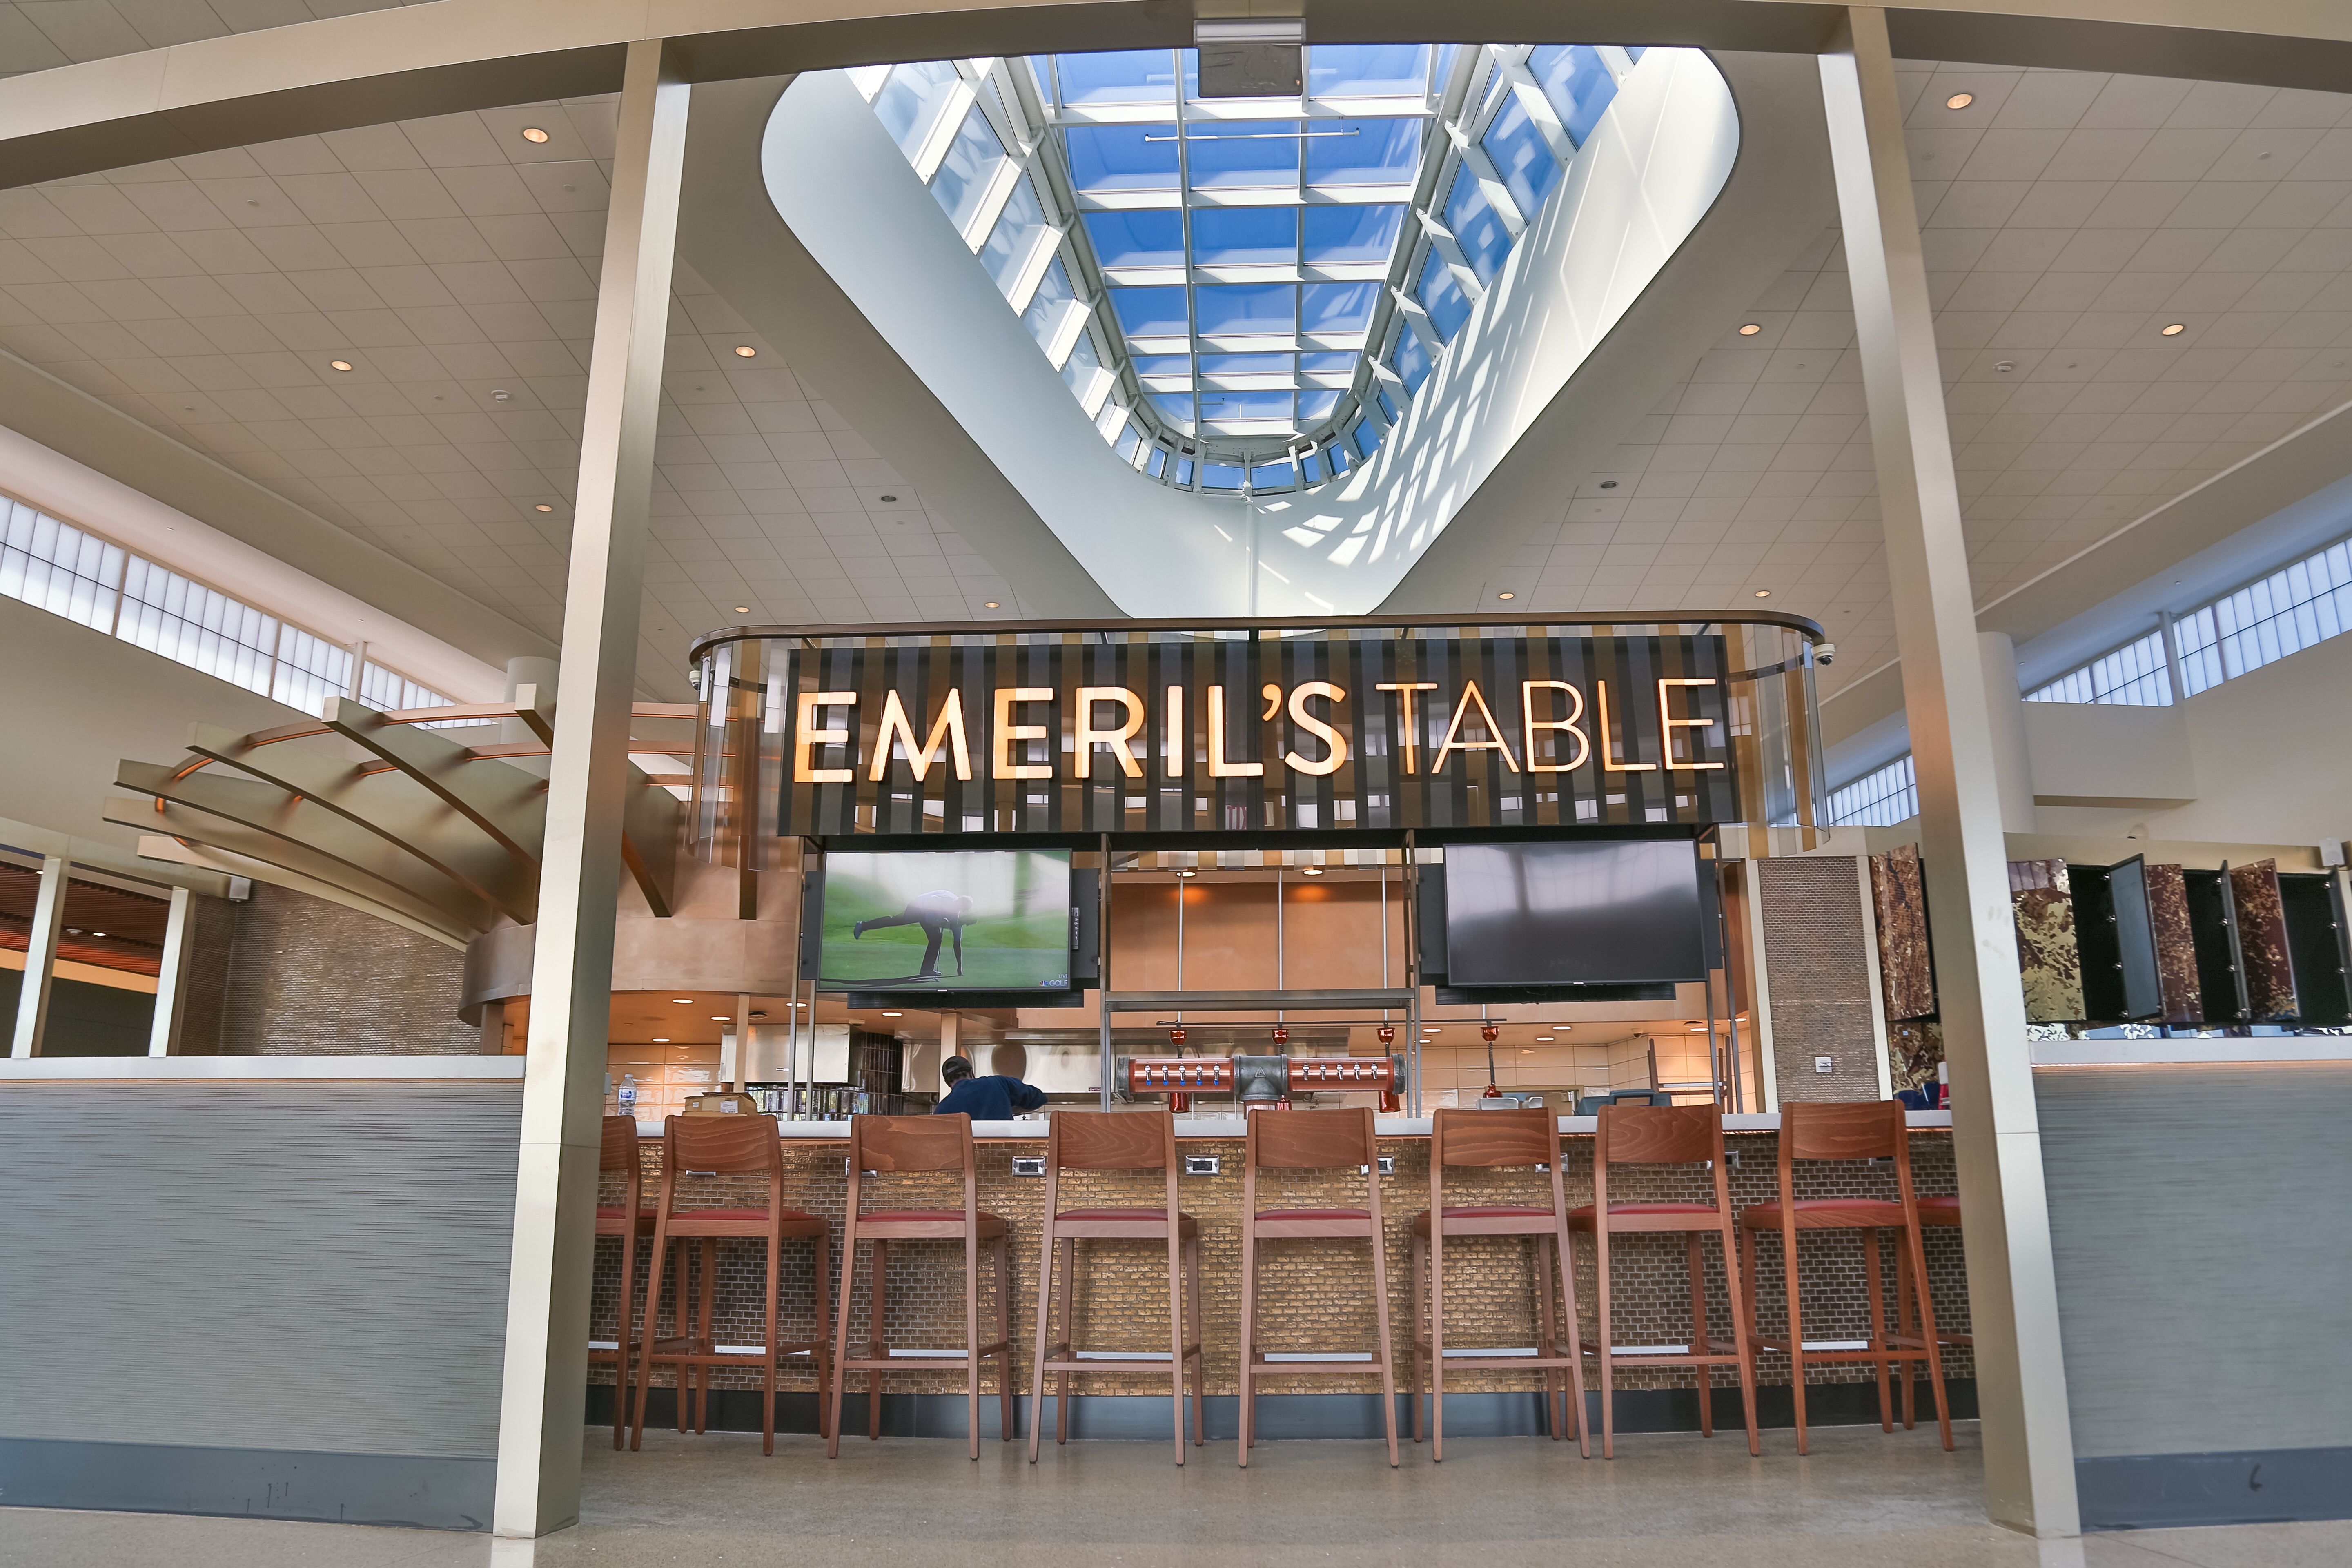 A long bar with an “Emeril’s Table” sign hanging above sits under a large skylight at the New Orleans airport.